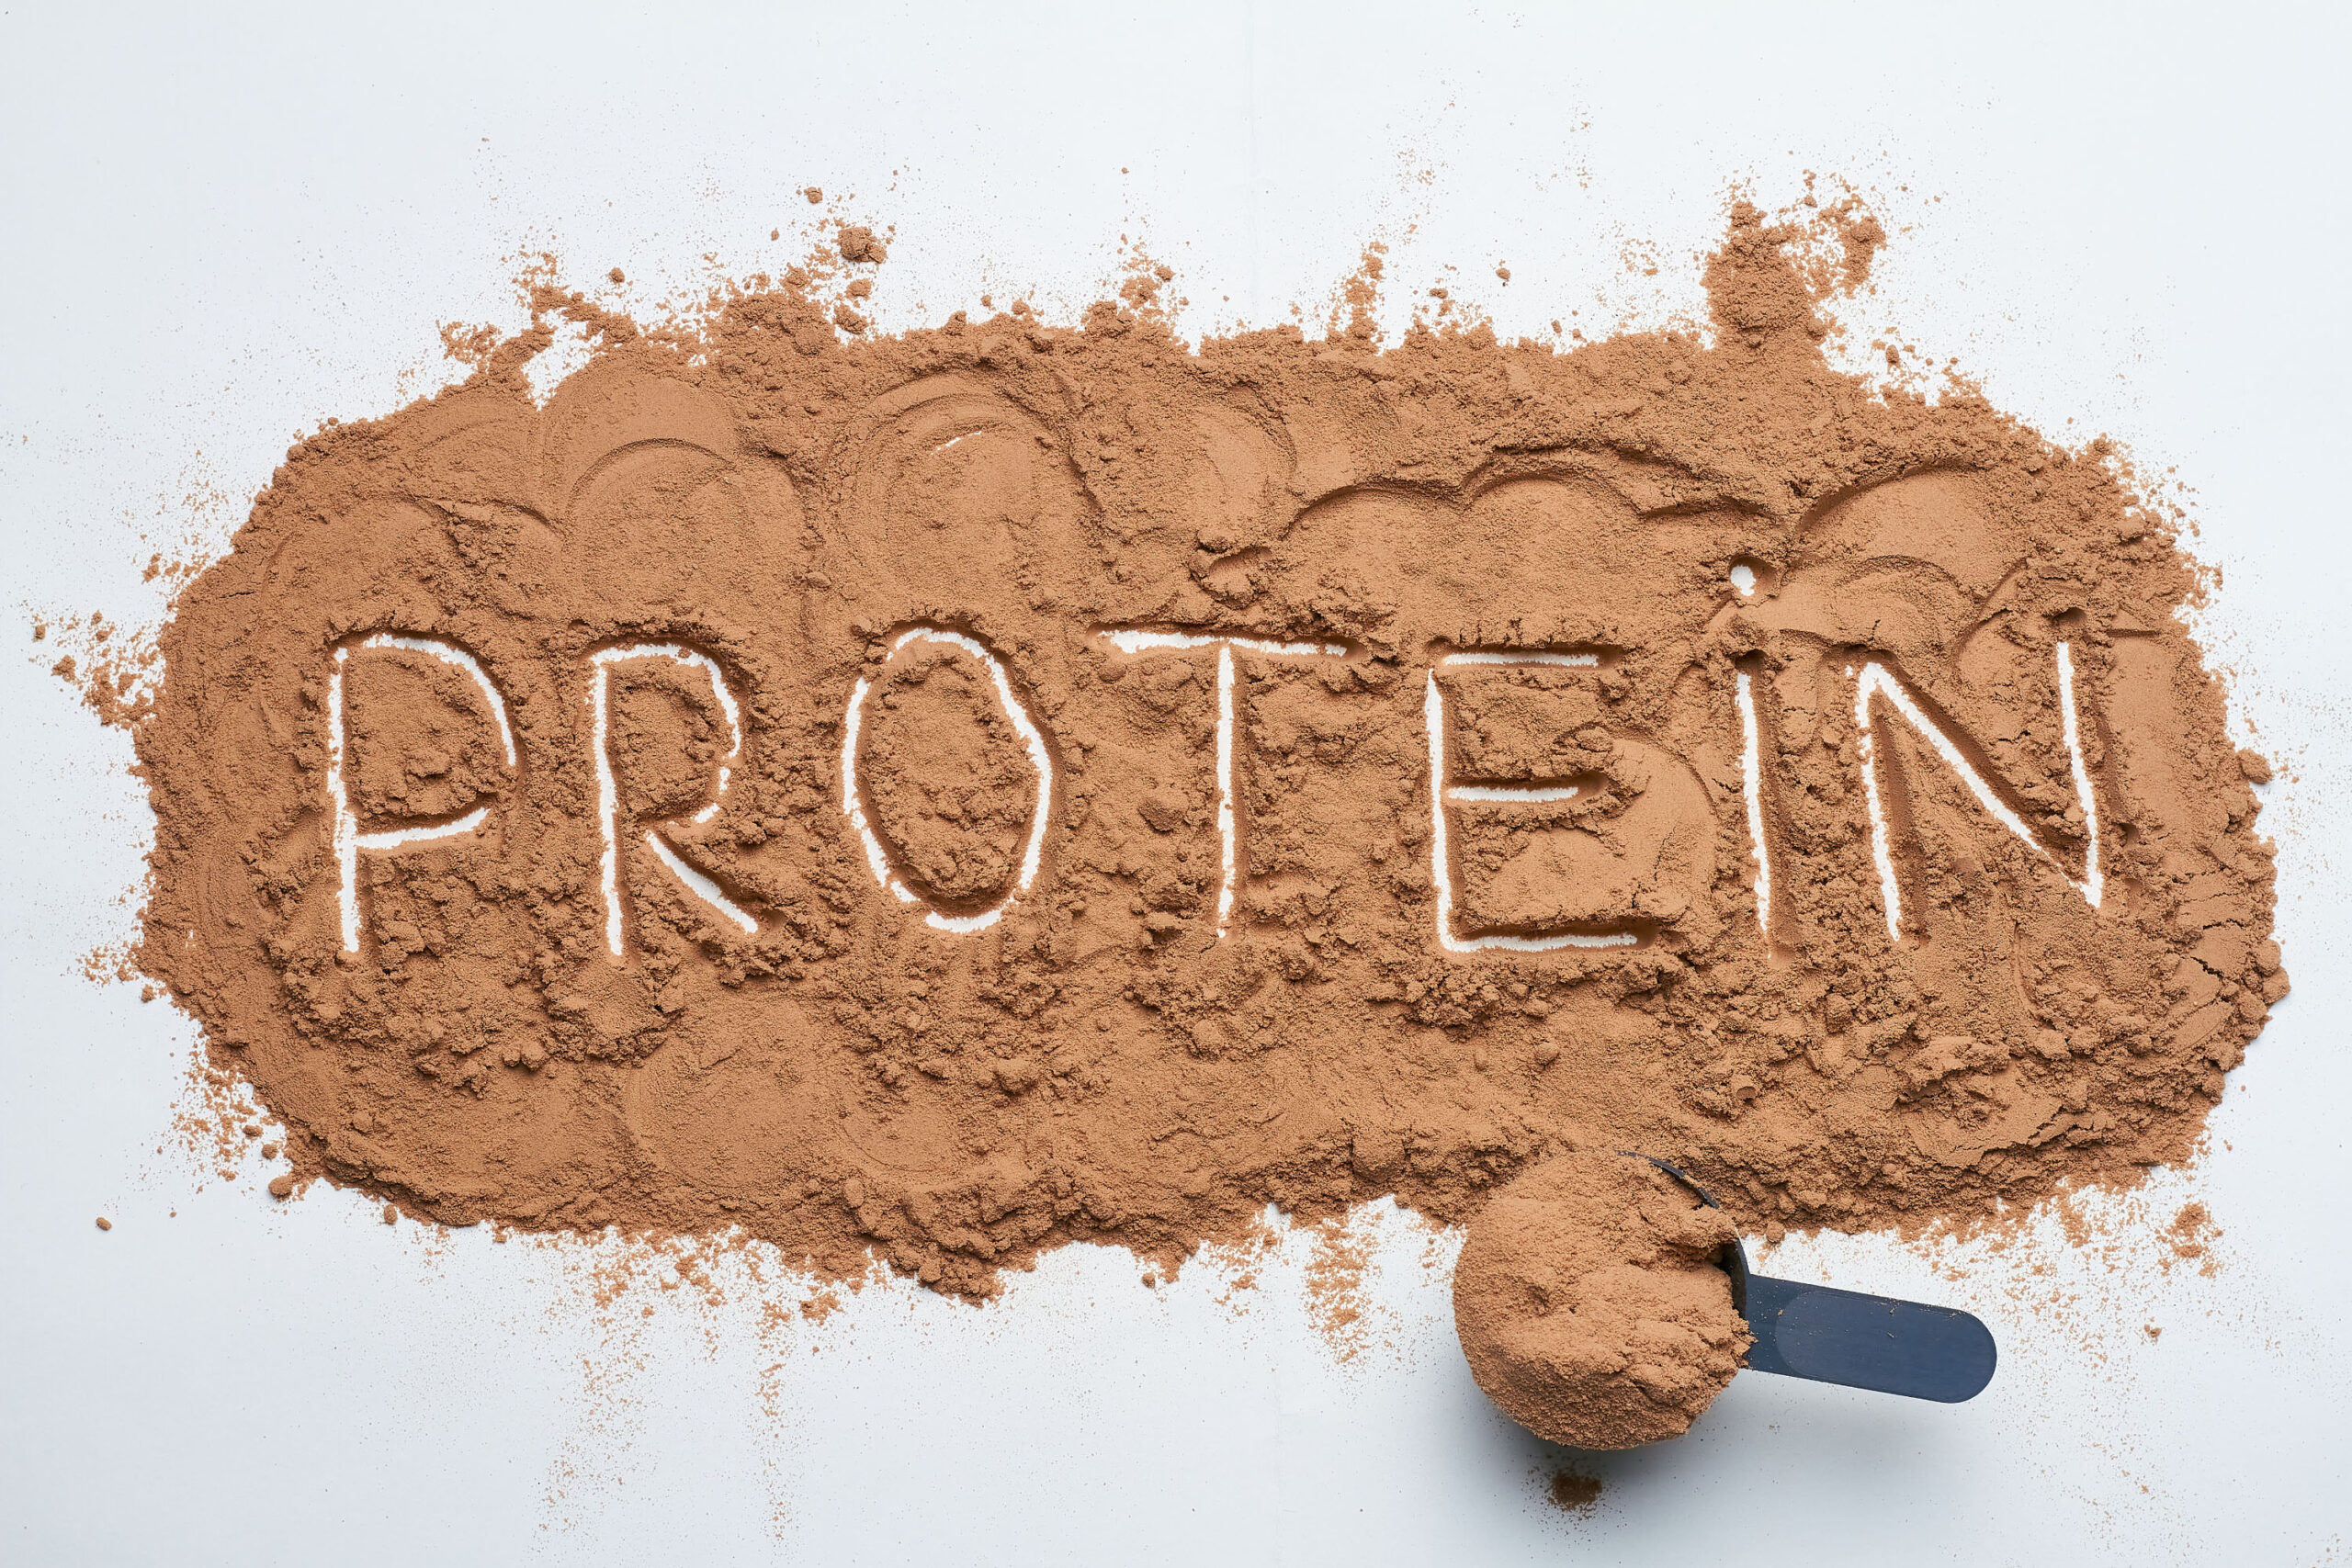 How To Boost Your Protein Intake & Add More Power To Your Workouts